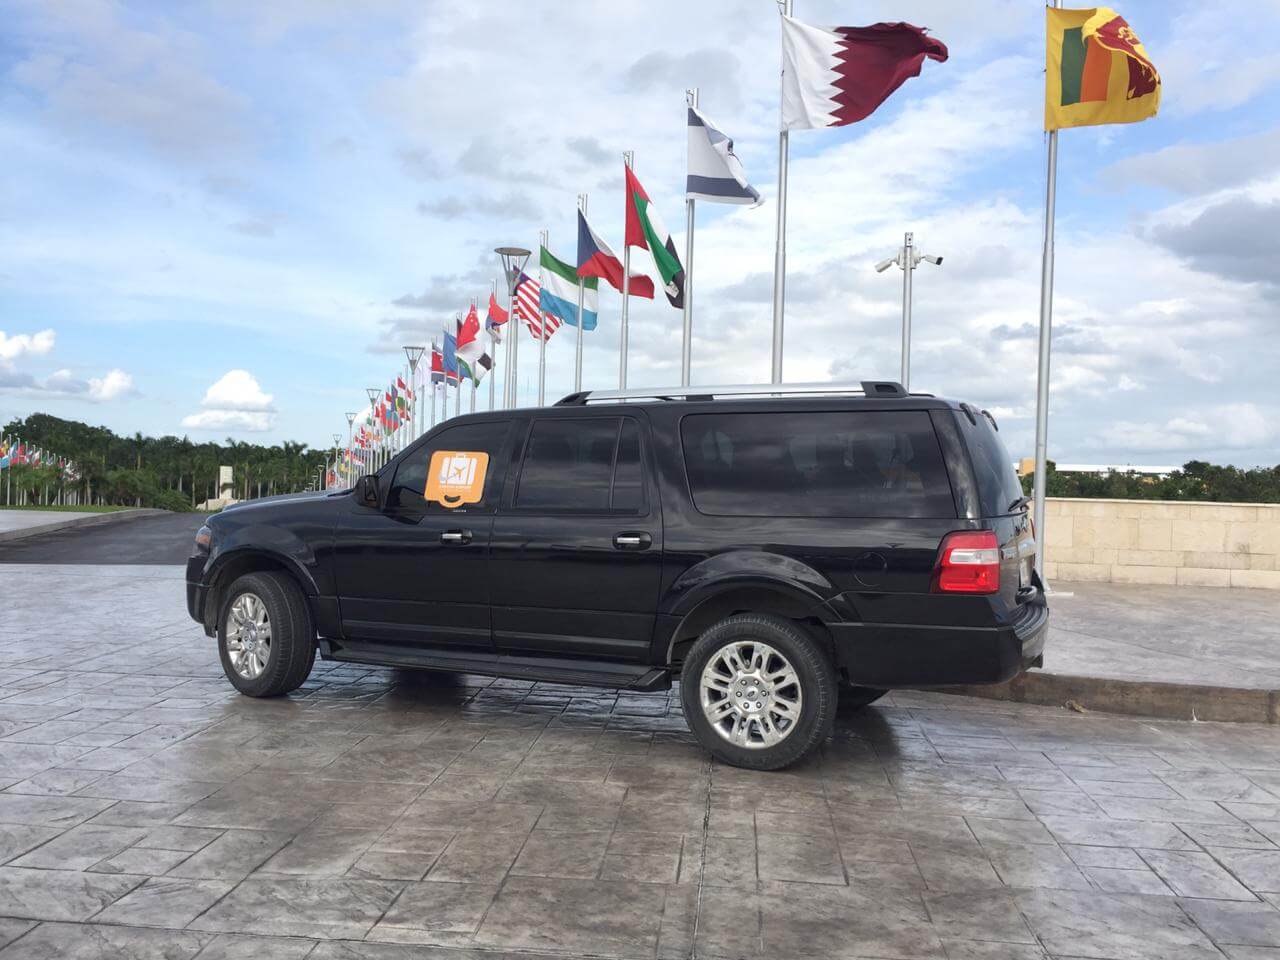 Black SUV parked by hotel entrance with several flags